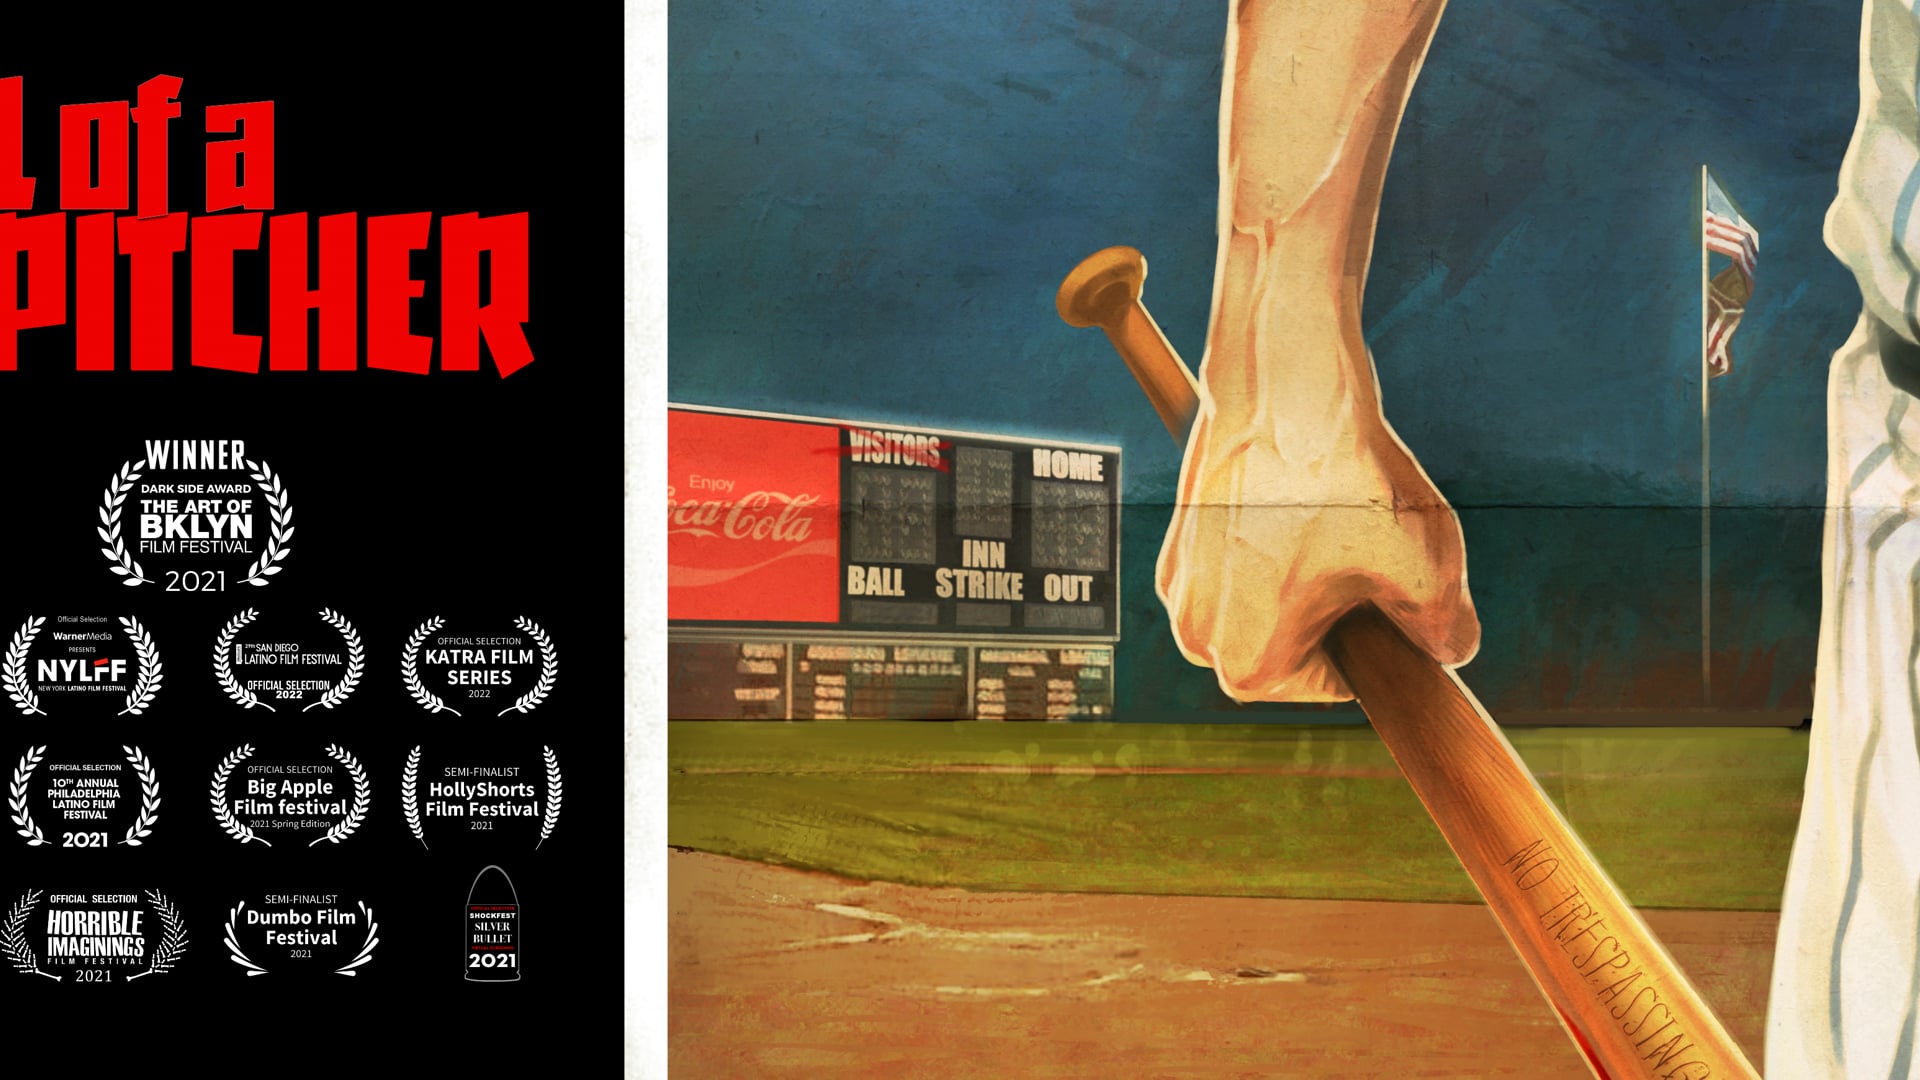 Trailer "Hell of a Pitcher"